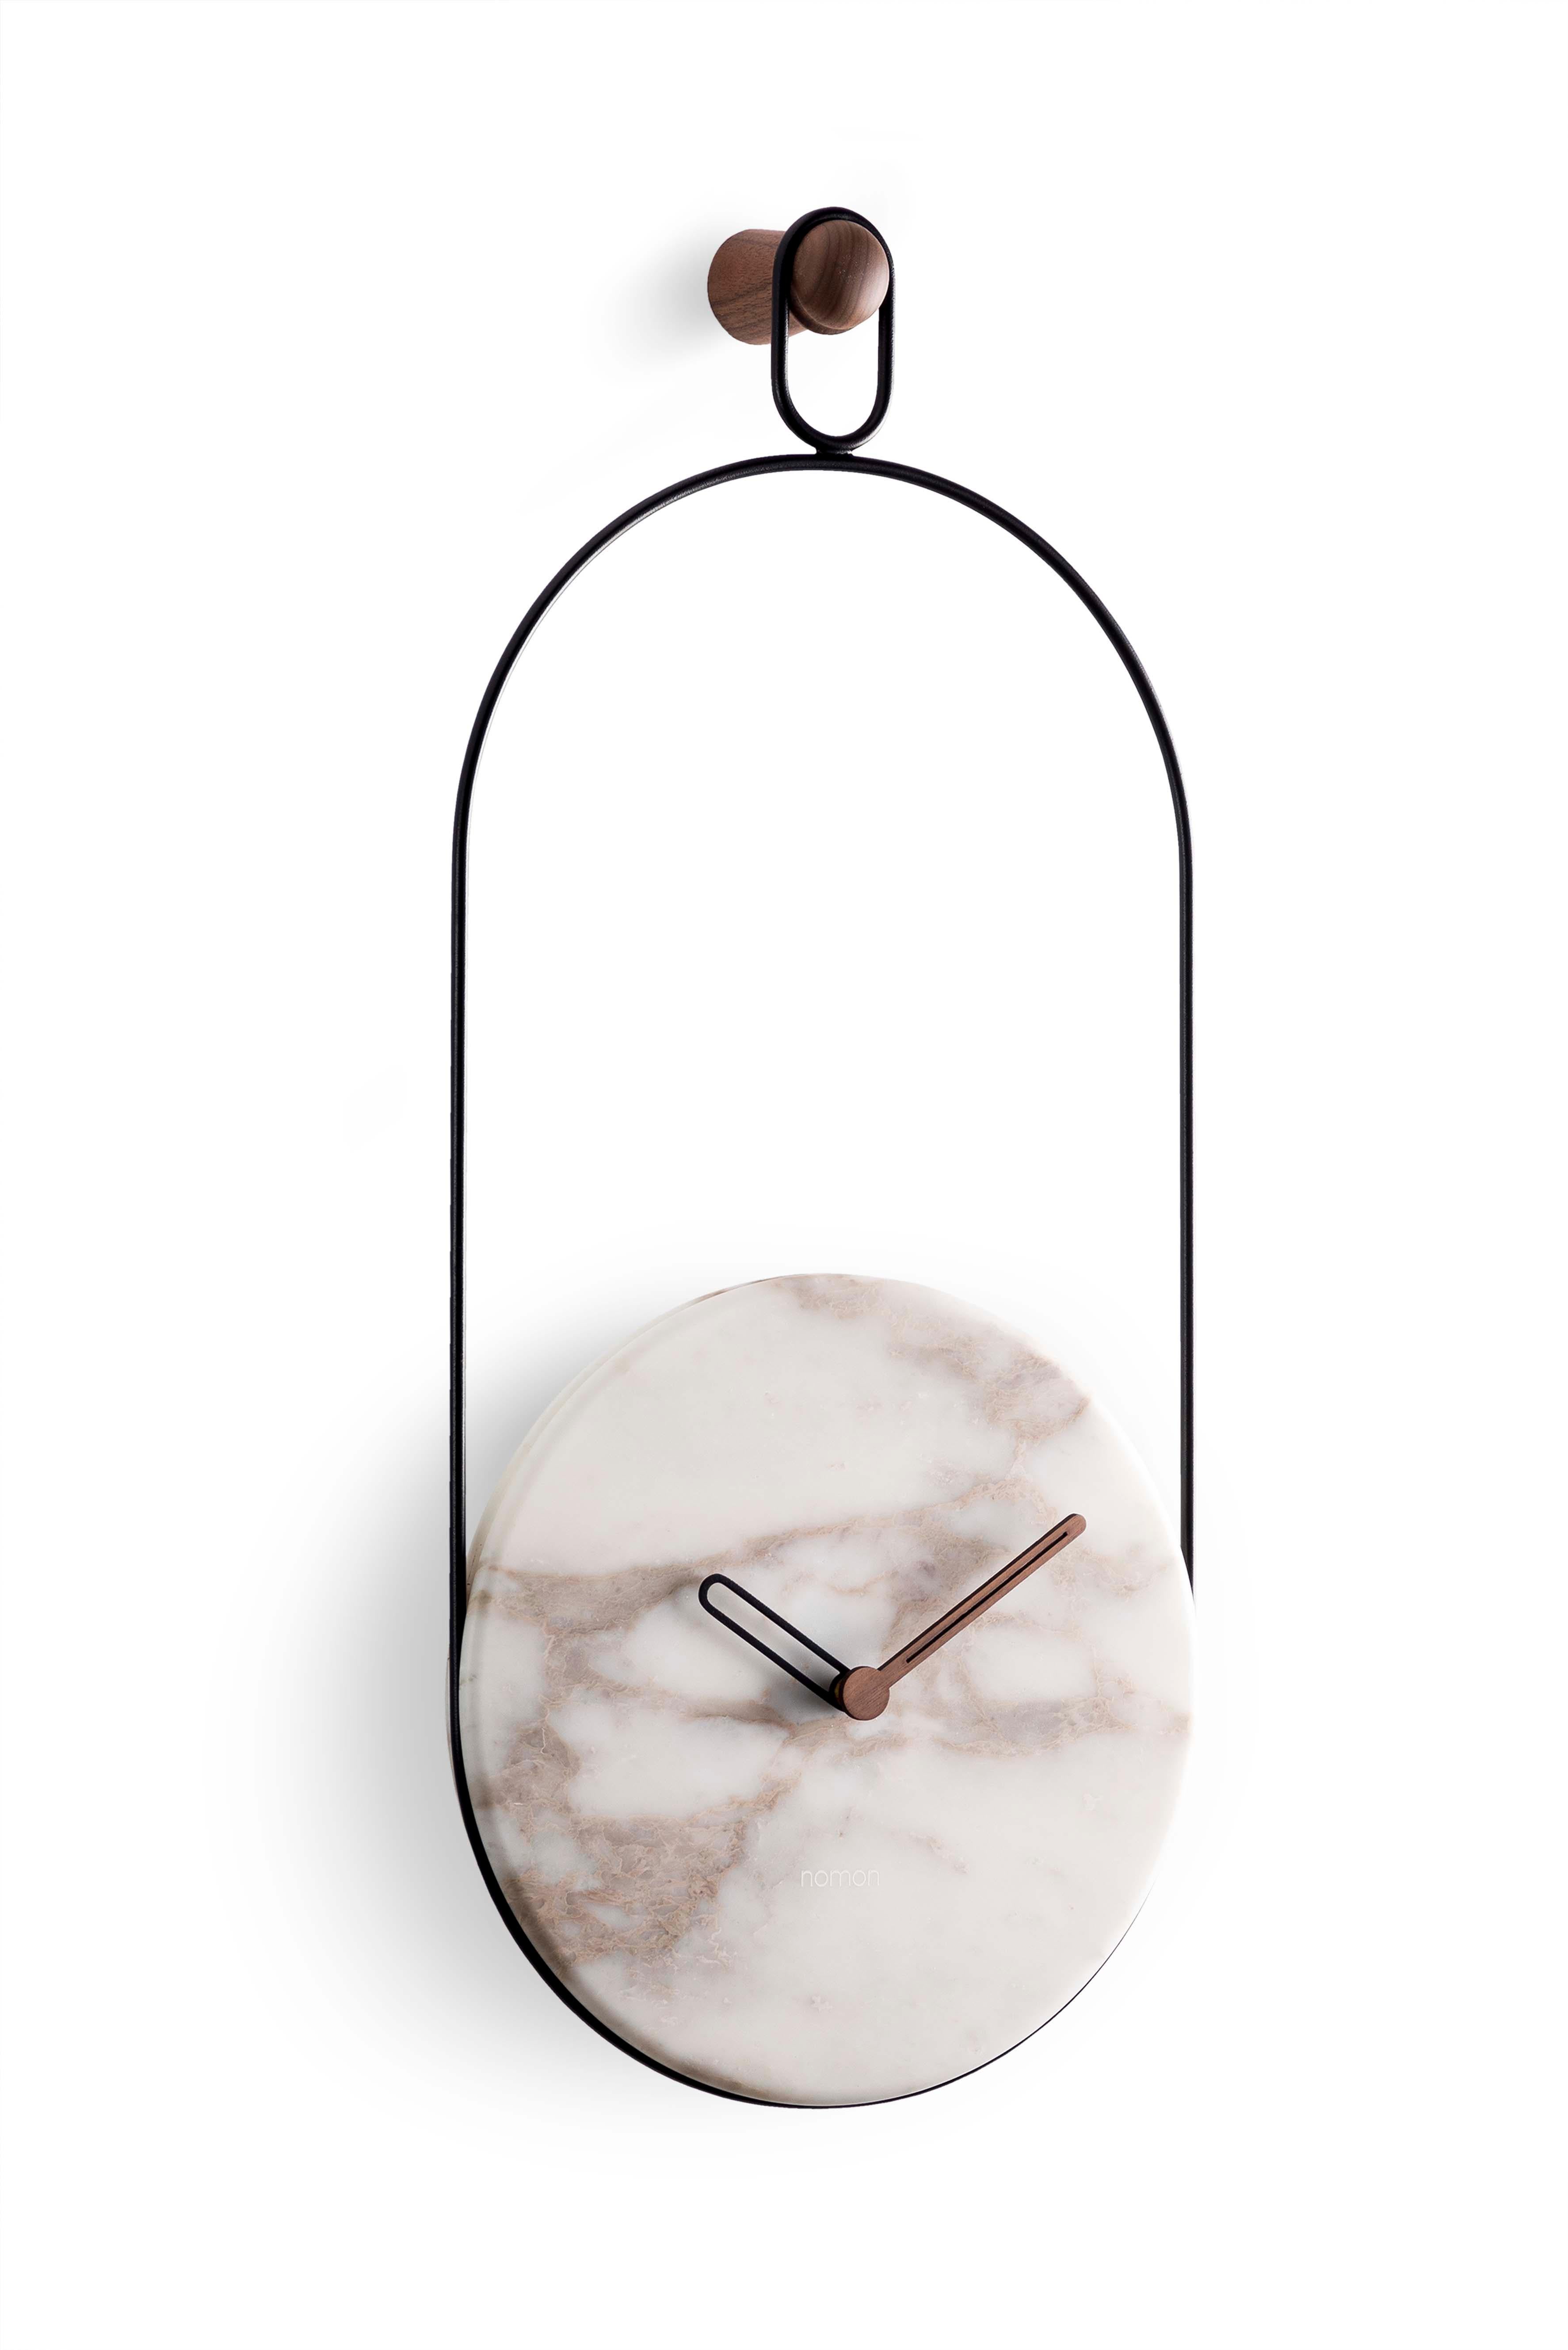 Nomon Eslabon Wall Clock  By Andres Martinez For Sale 1